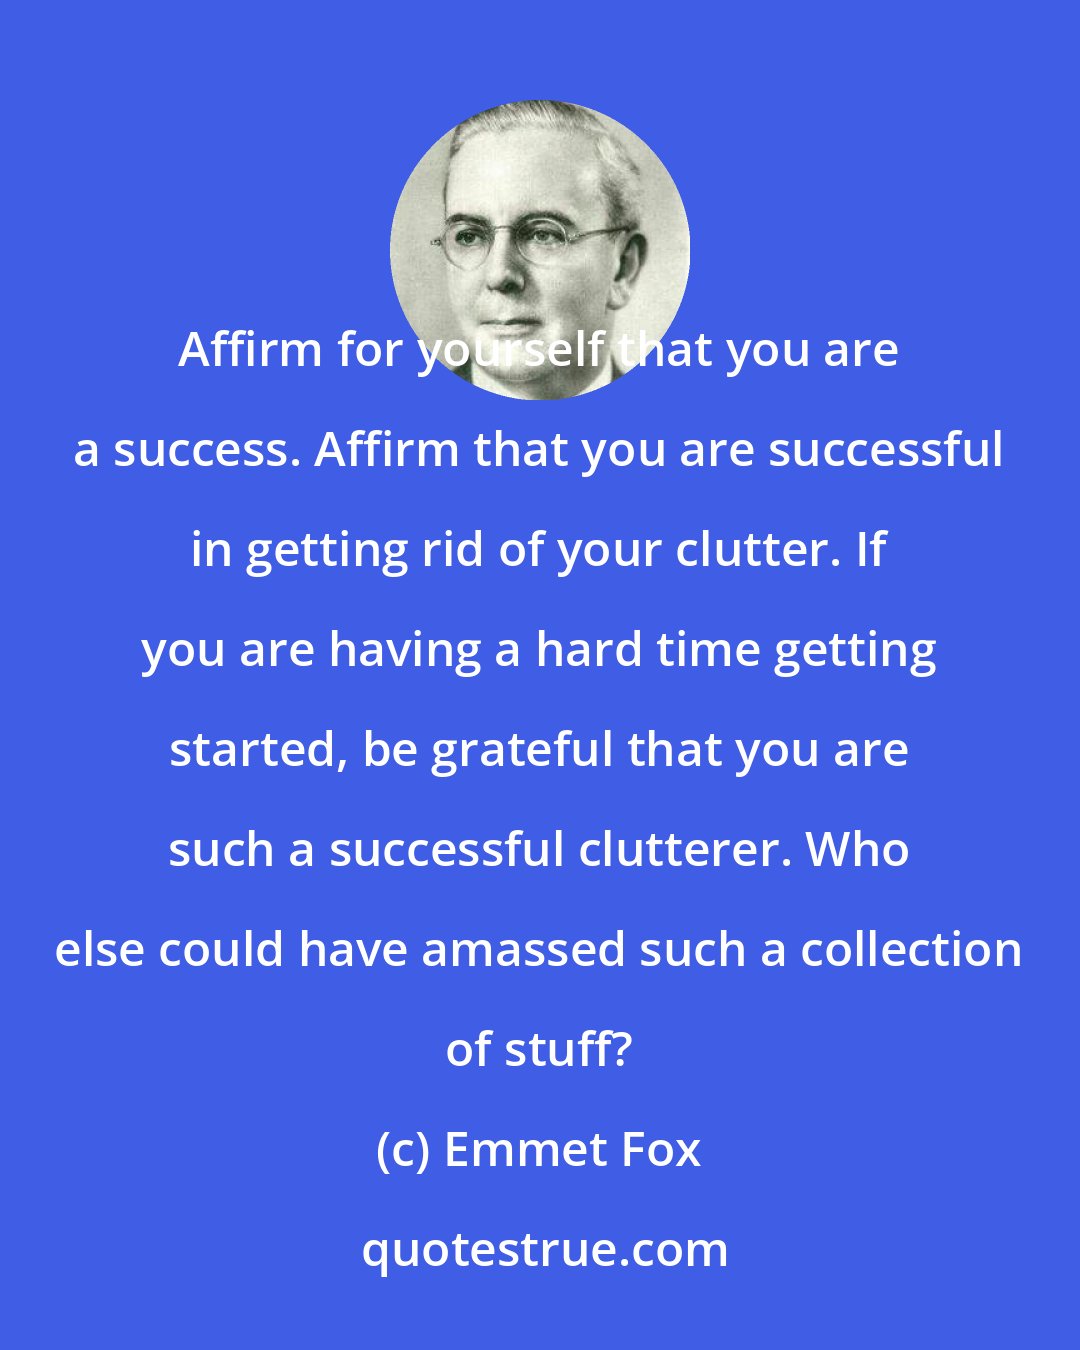 Emmet Fox: Affirm for yourself that you are a success. Affirm that you are successful in getting rid of your clutter. If you are having a hard time getting started, be grateful that you are such a successful clutterer. Who else could have amassed such a collection of stuff?